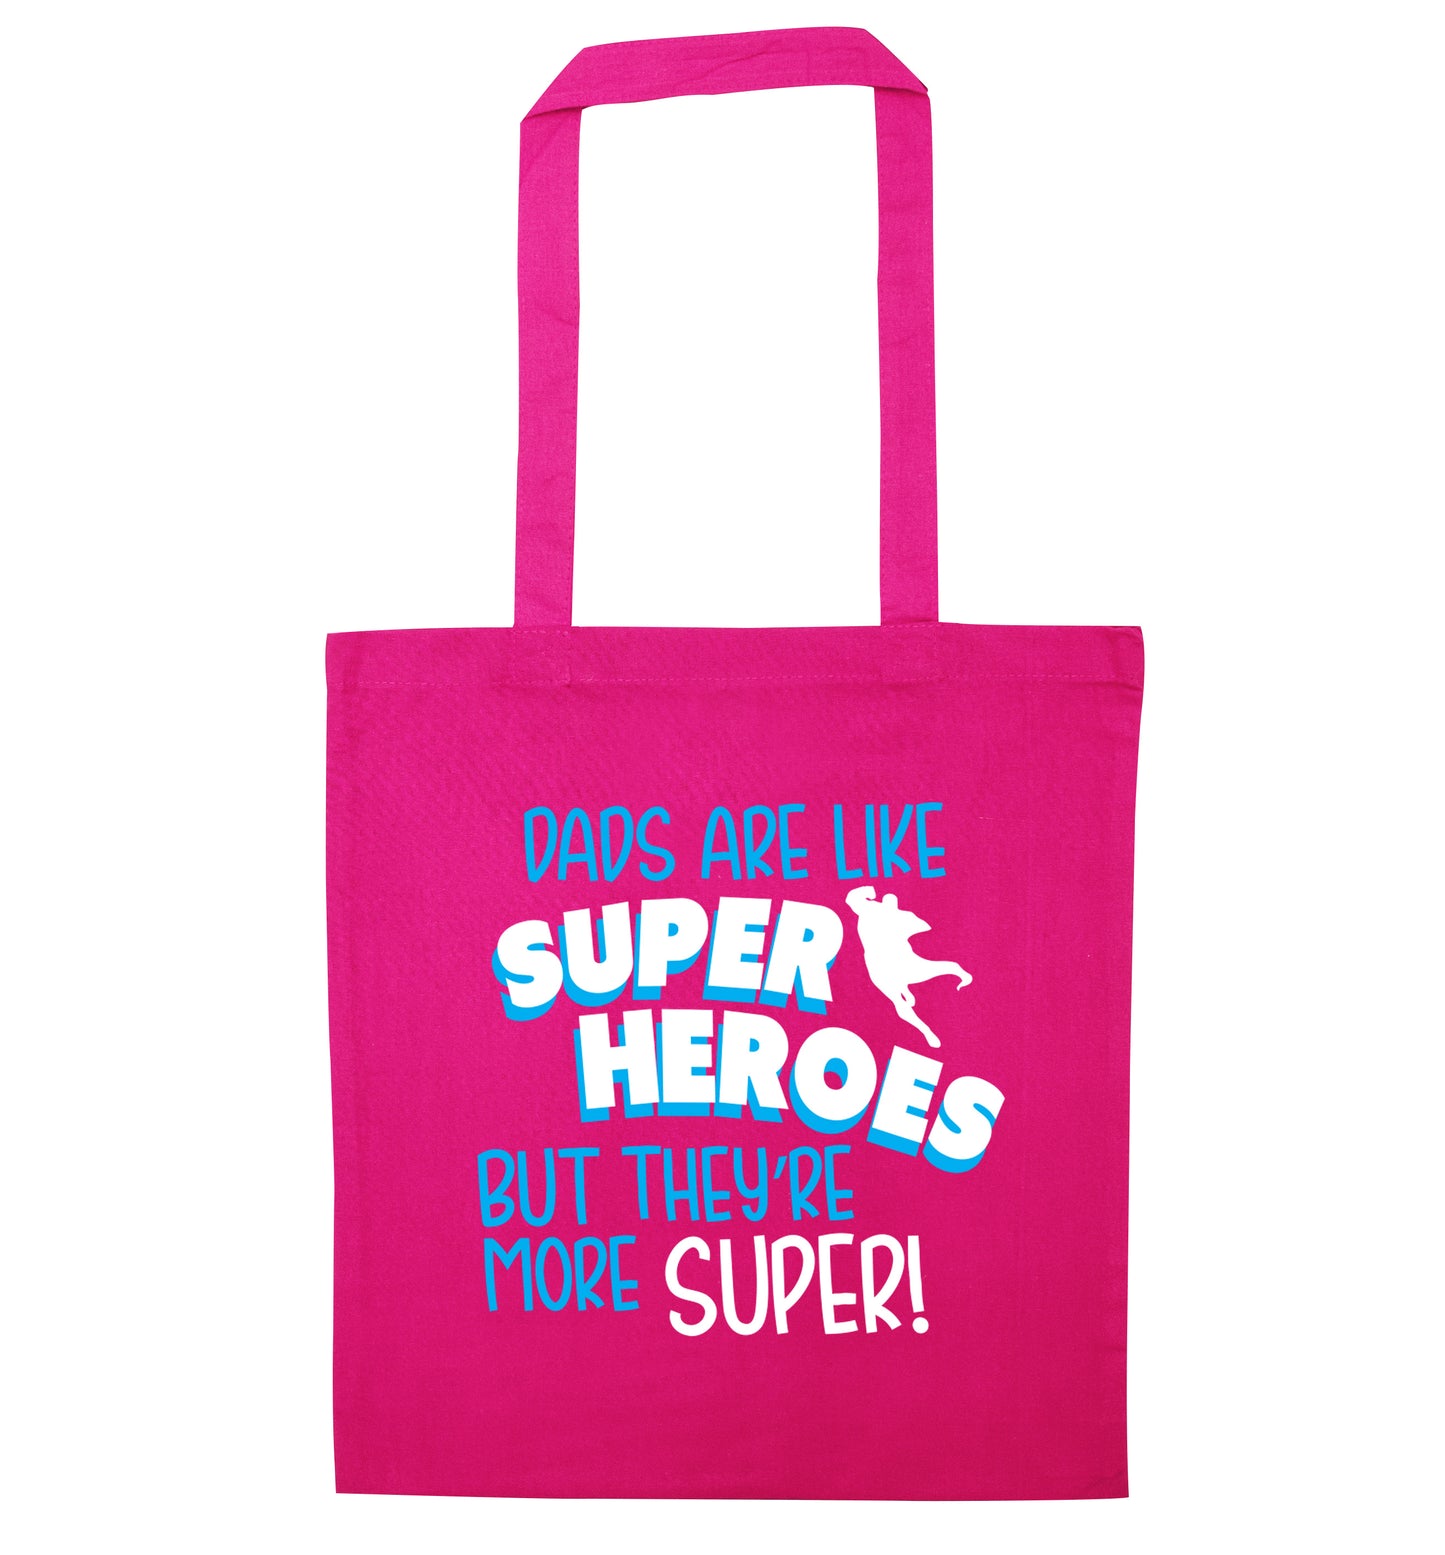 Dads are like superheros but they're more super pink tote bag